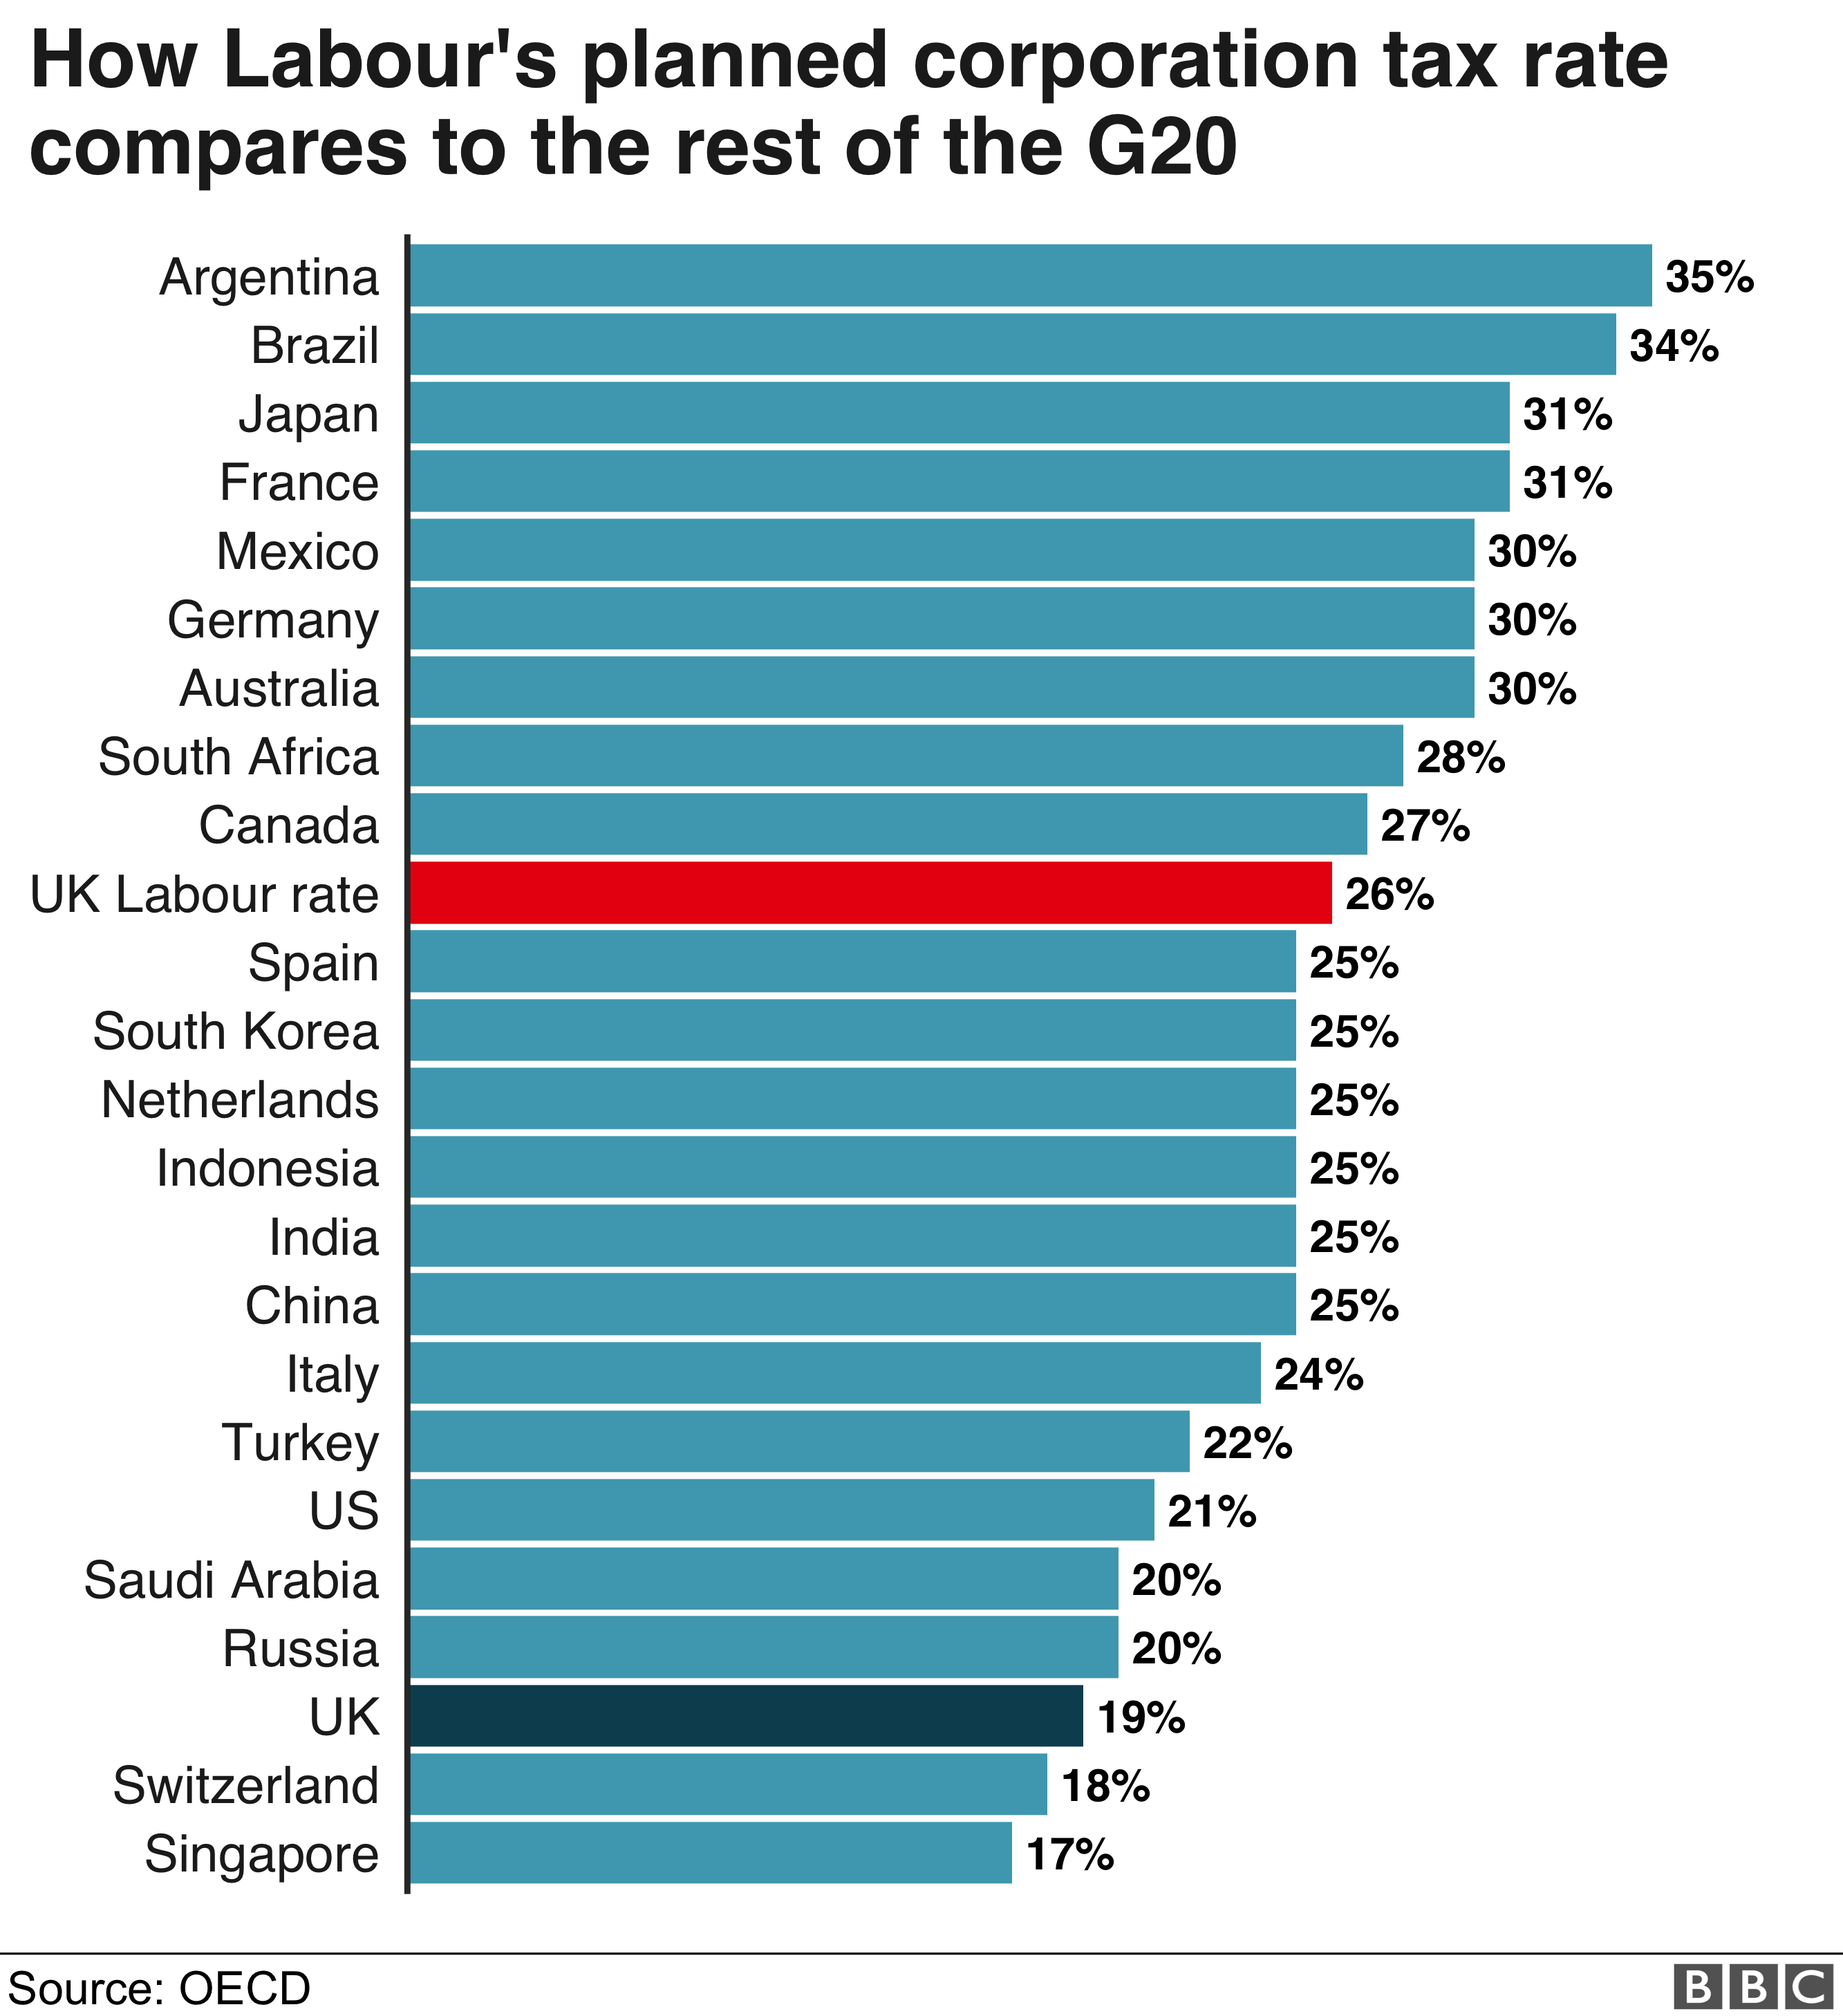 OECD chart showing corporation tax rates across G20 countries